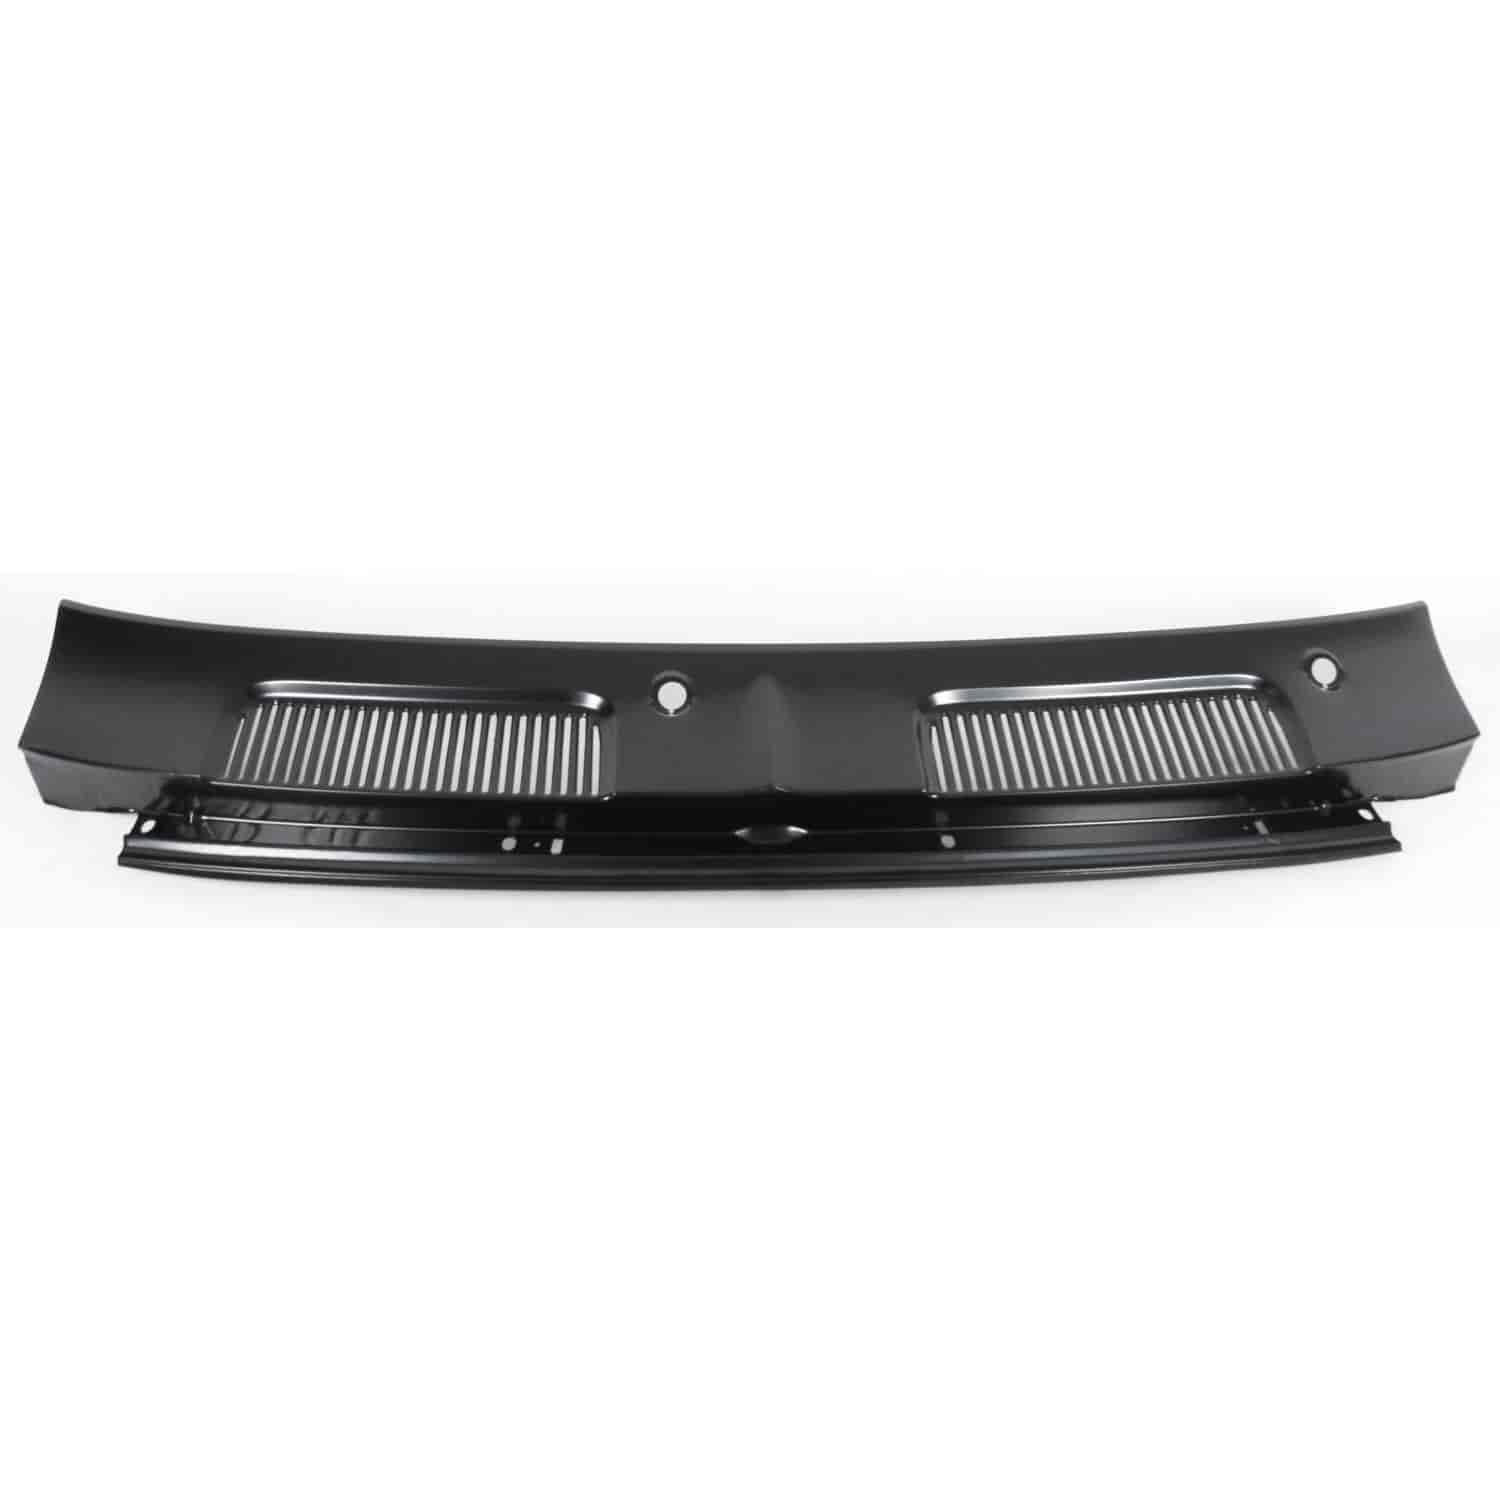 CP01-671 Hood Cowl Vent Grille for 1967-1969 Chevy